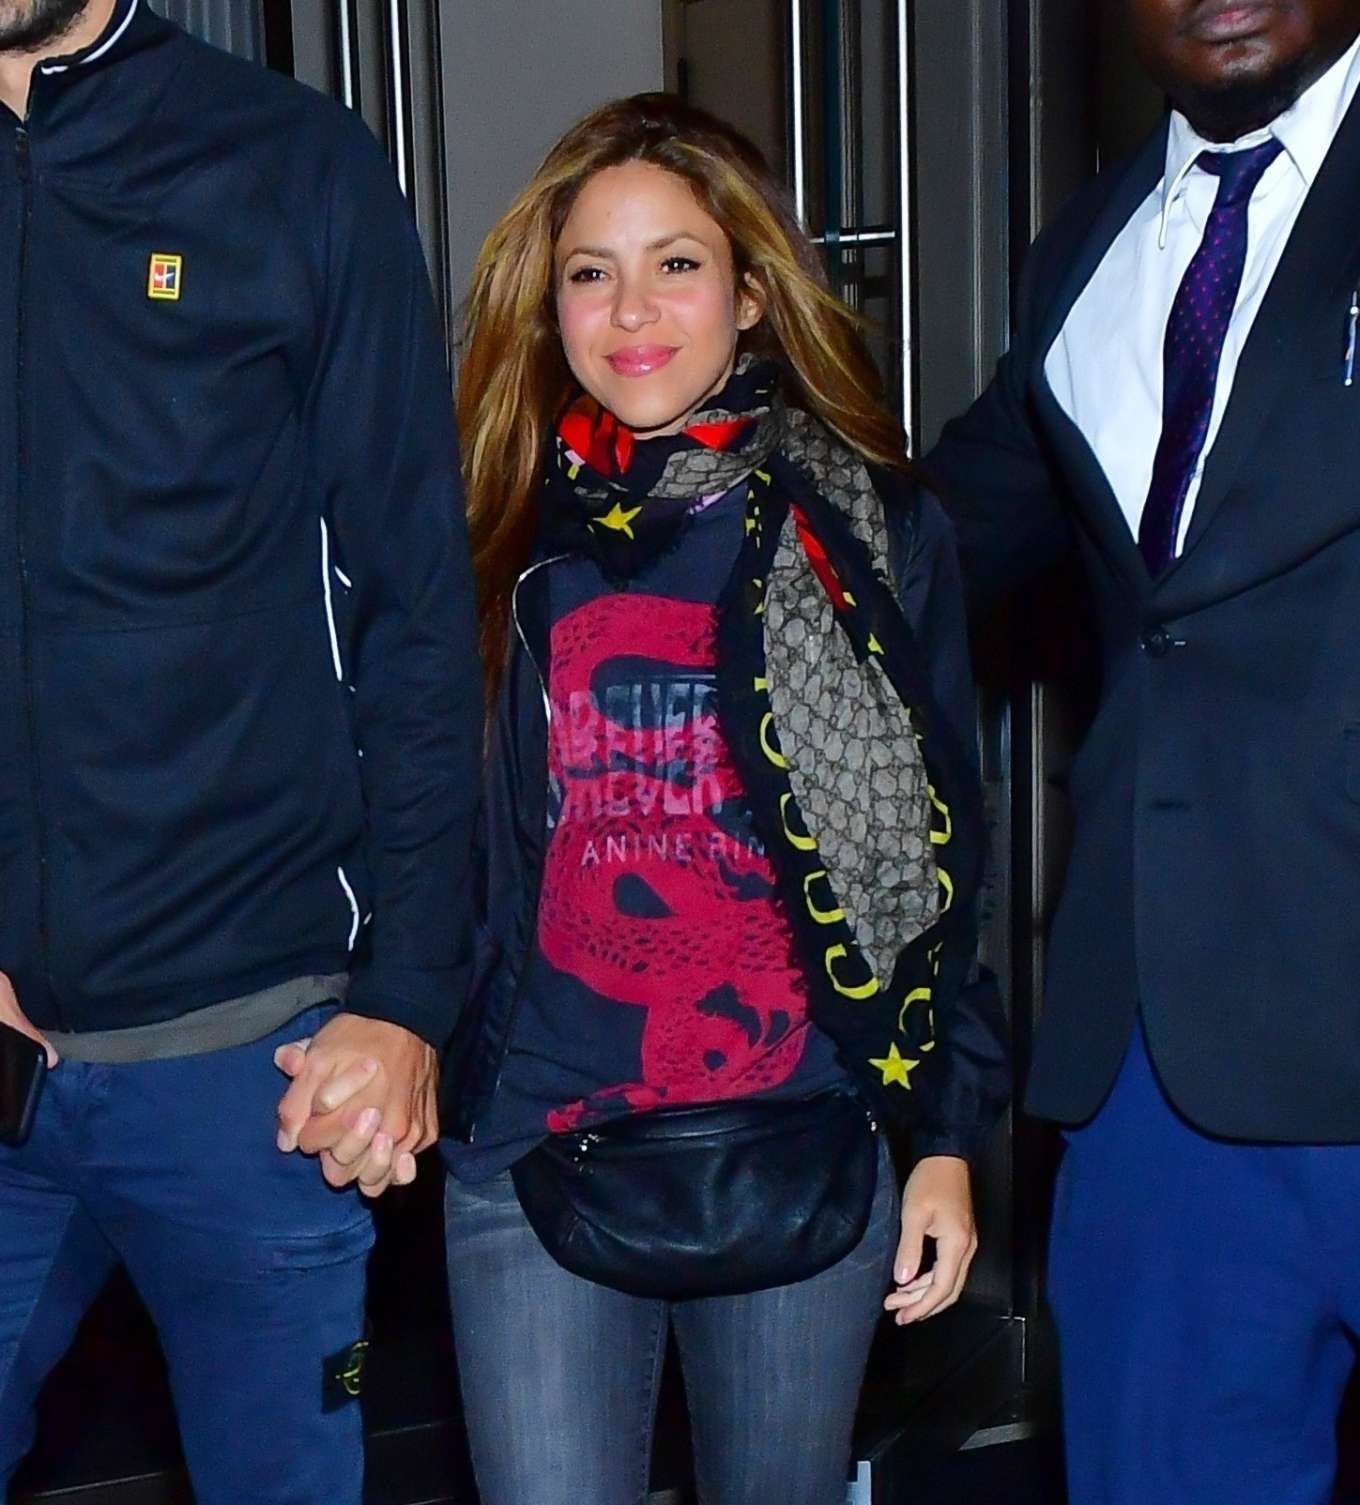 Shakira with her husband for late night dinner in NY